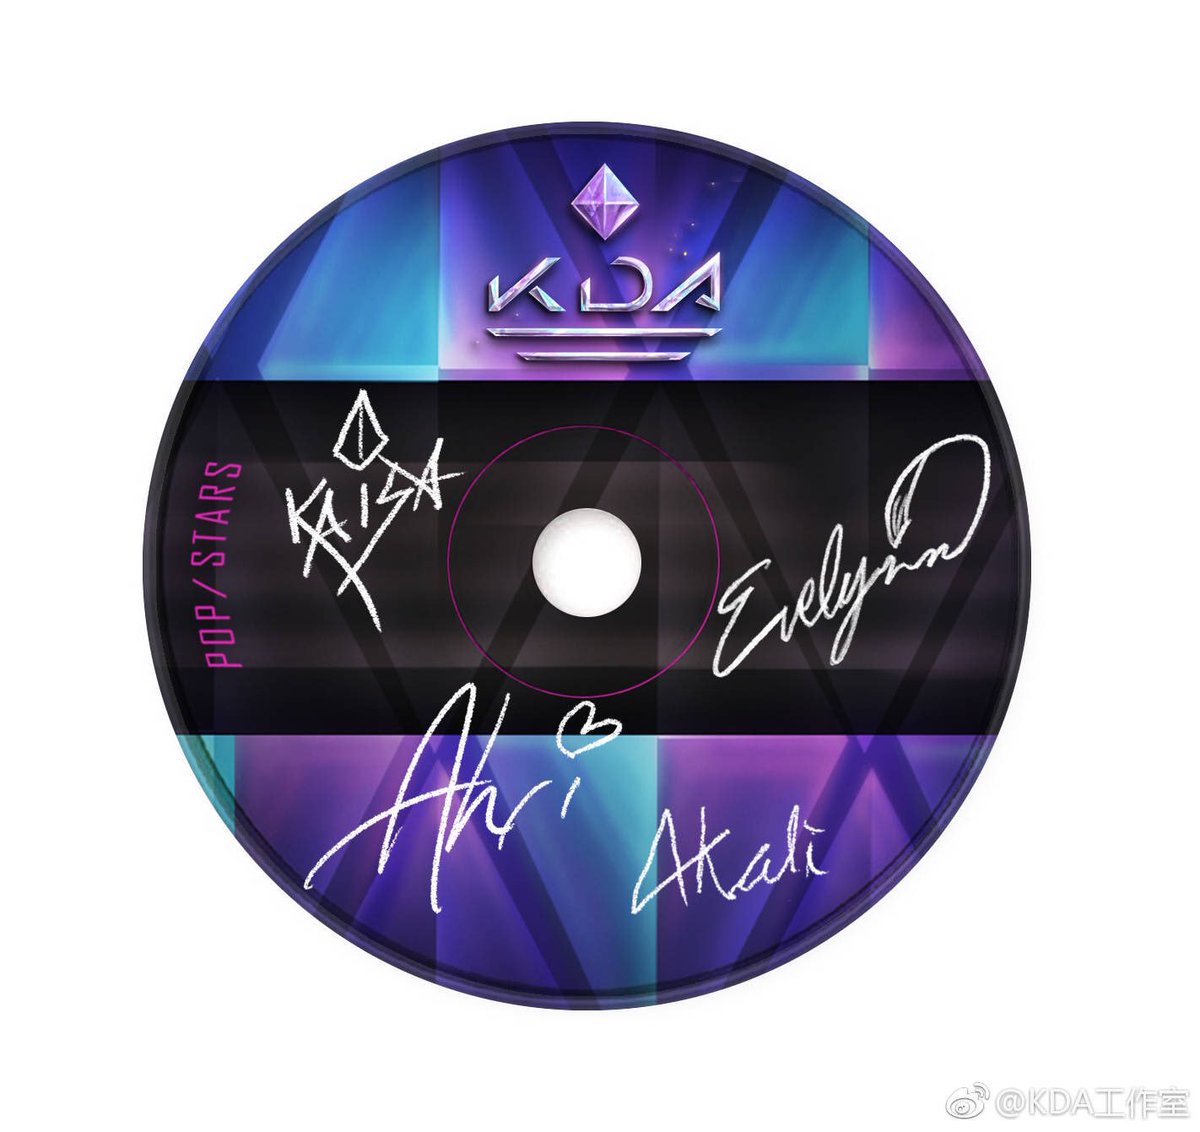 Gift K Da Weibo Update The Collector S Edition Vinyl Record Pop Stars Is Released Does Anyone Want It I I